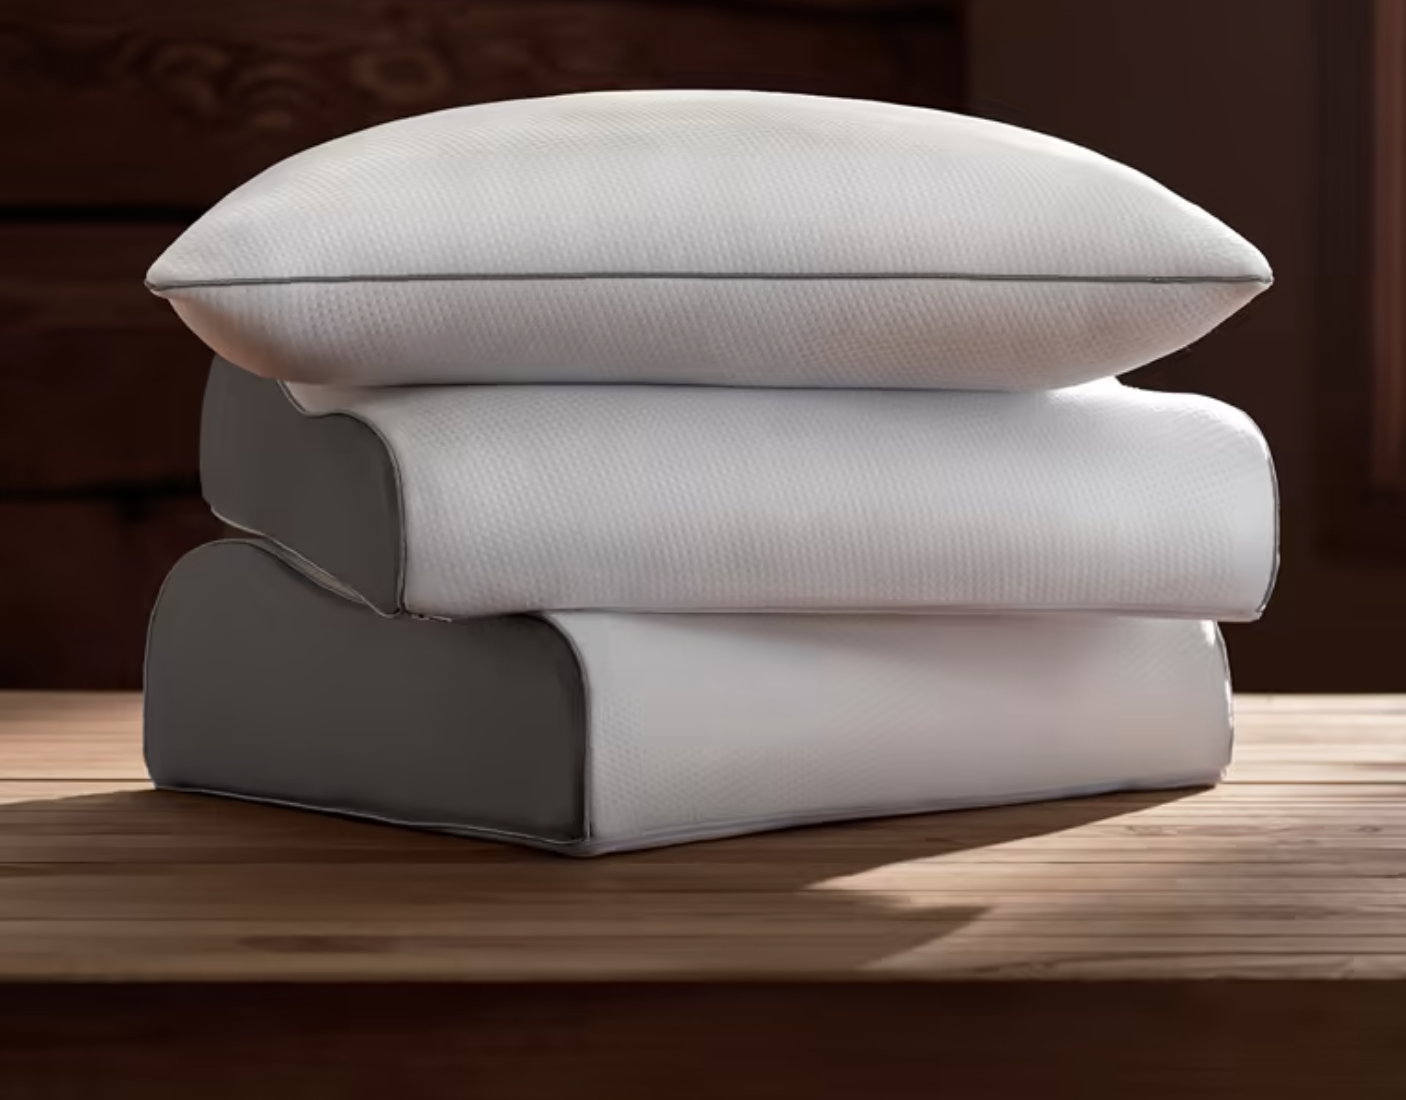 A stack of three different bed pillows are shown